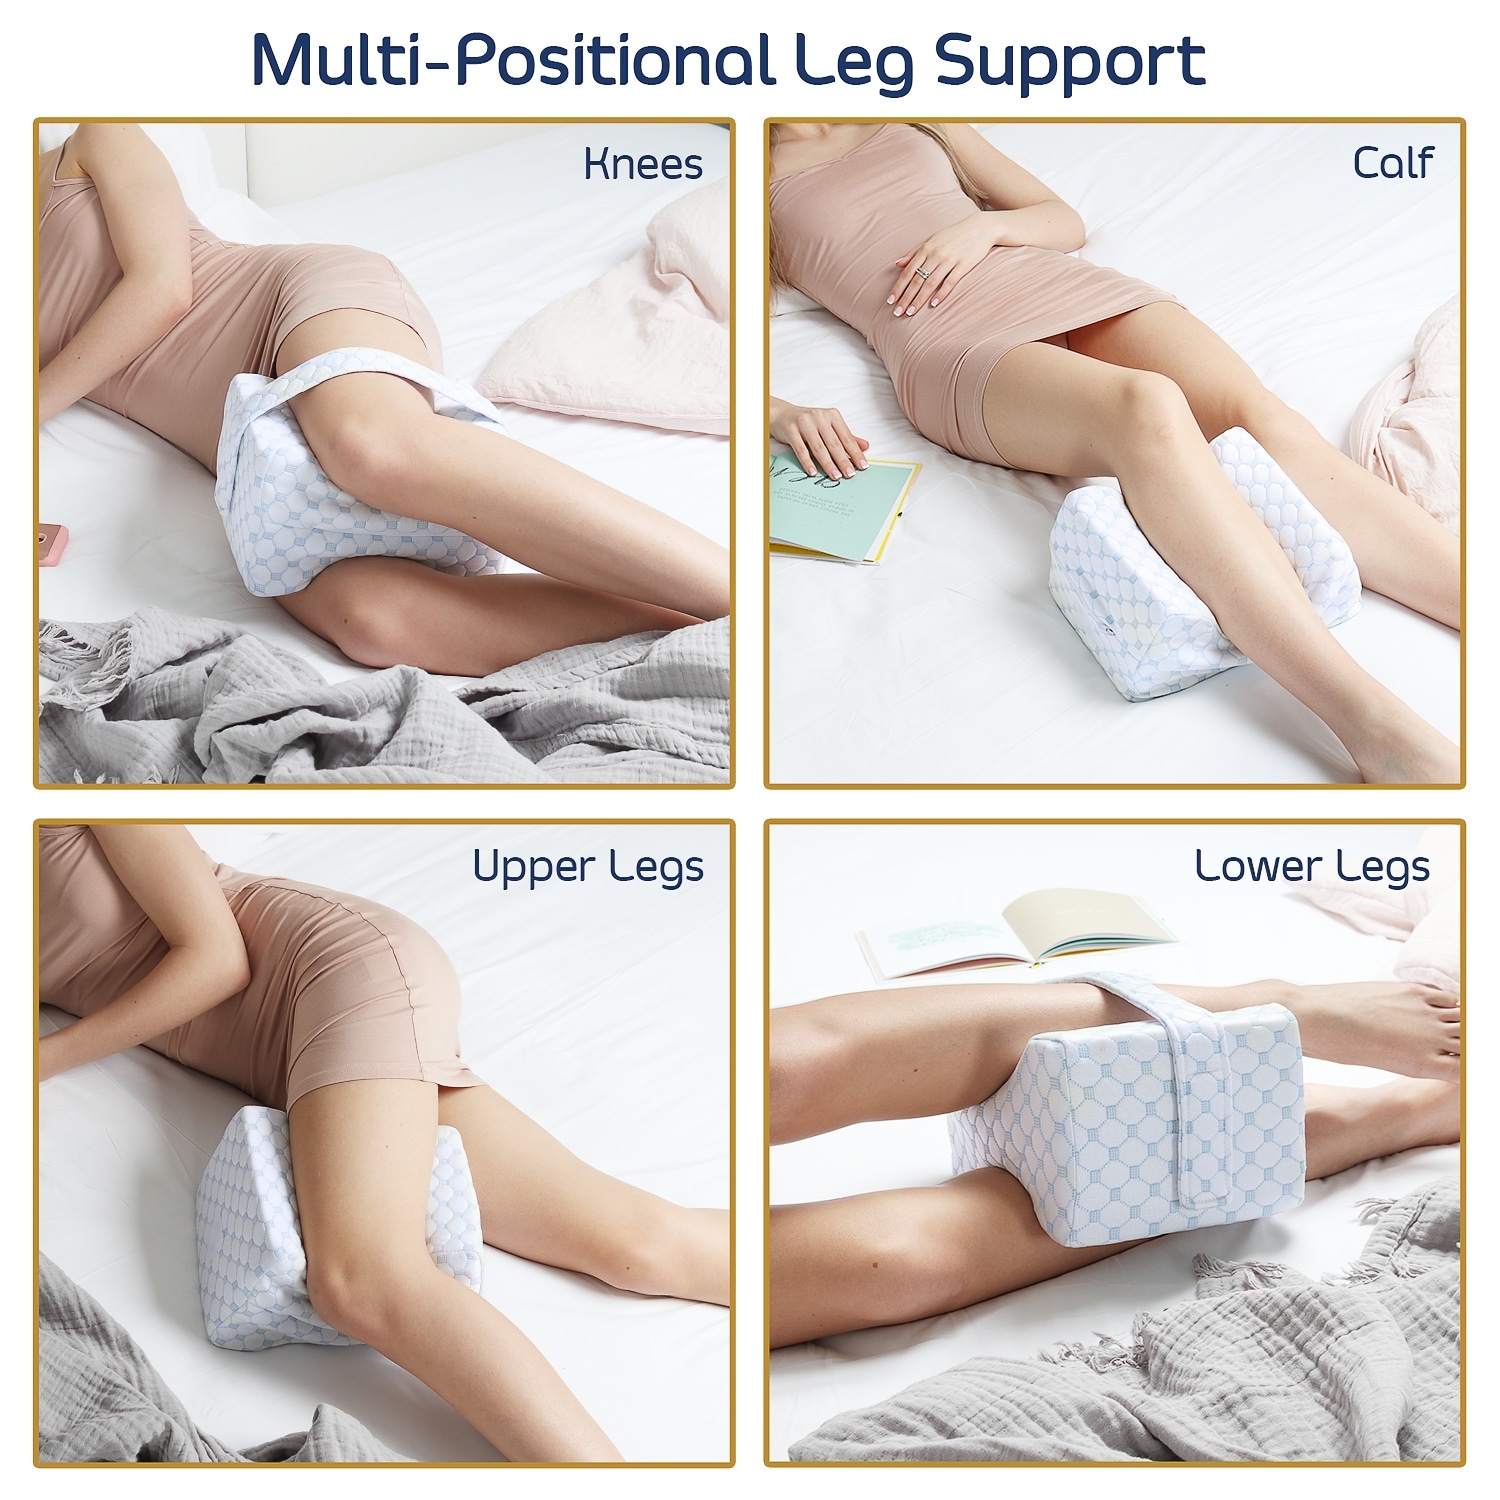 https://ak1.ostkcdn.com/images/products/is/images/direct/c59d7e49046efff10c4568b2a52fefebf1a74184/Nestl-Knee-Pillow-with-Cooling-Cover-and-Adjustable-Strap.jpg